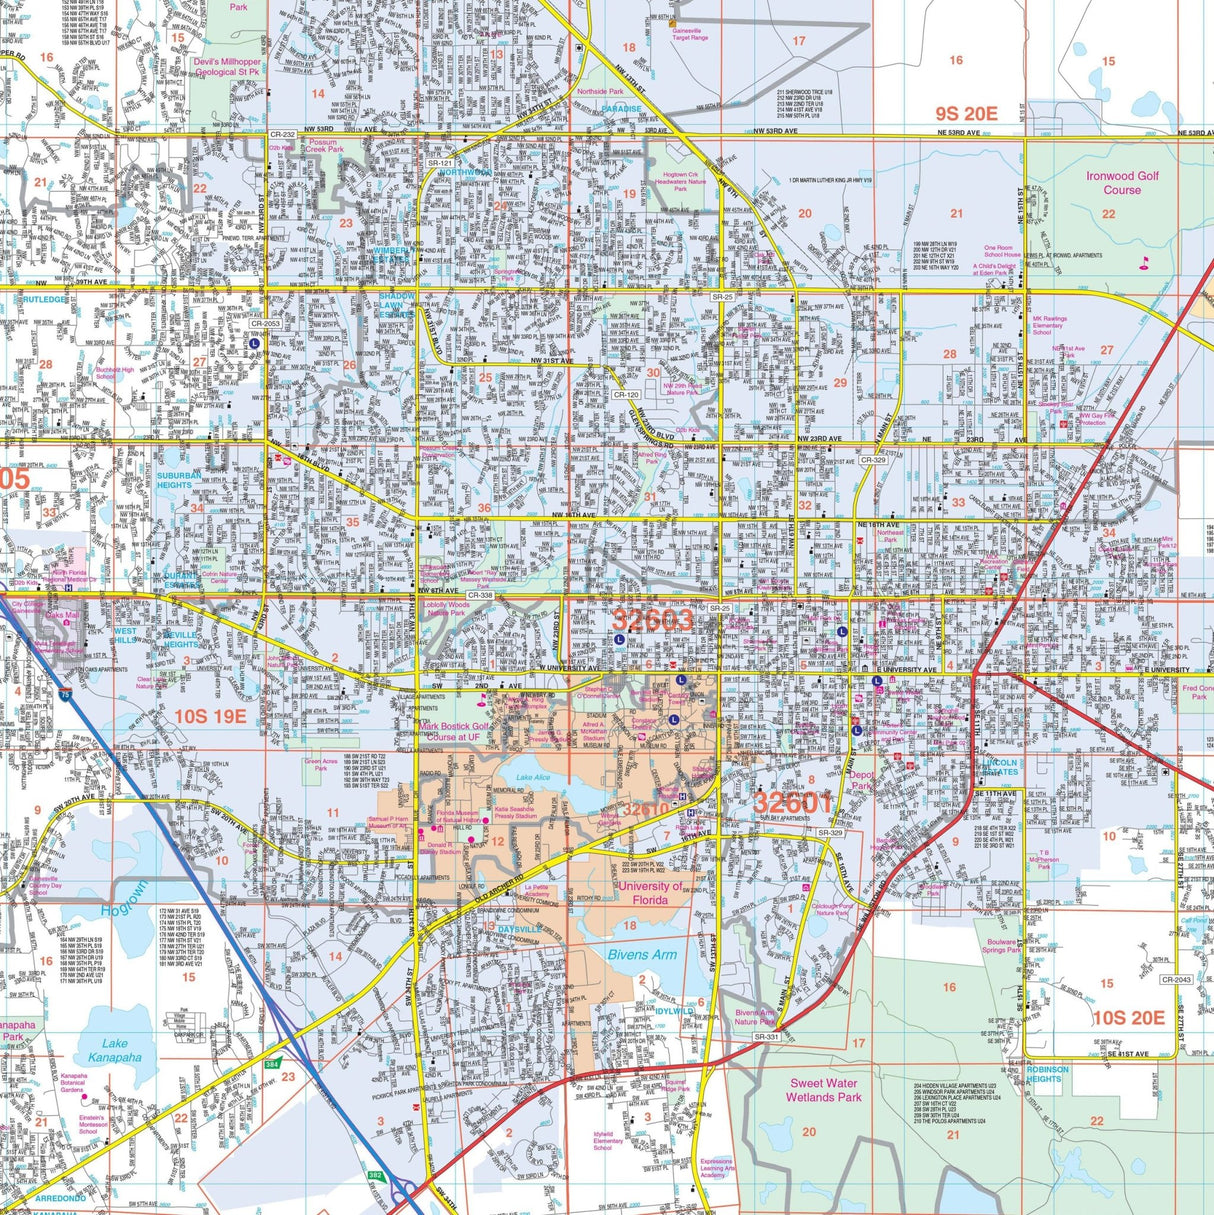 Gainesville & Alachua County, FL Wall Map - KA-C-FL-GAINESVILLE-PAPER - Ultimate Globes